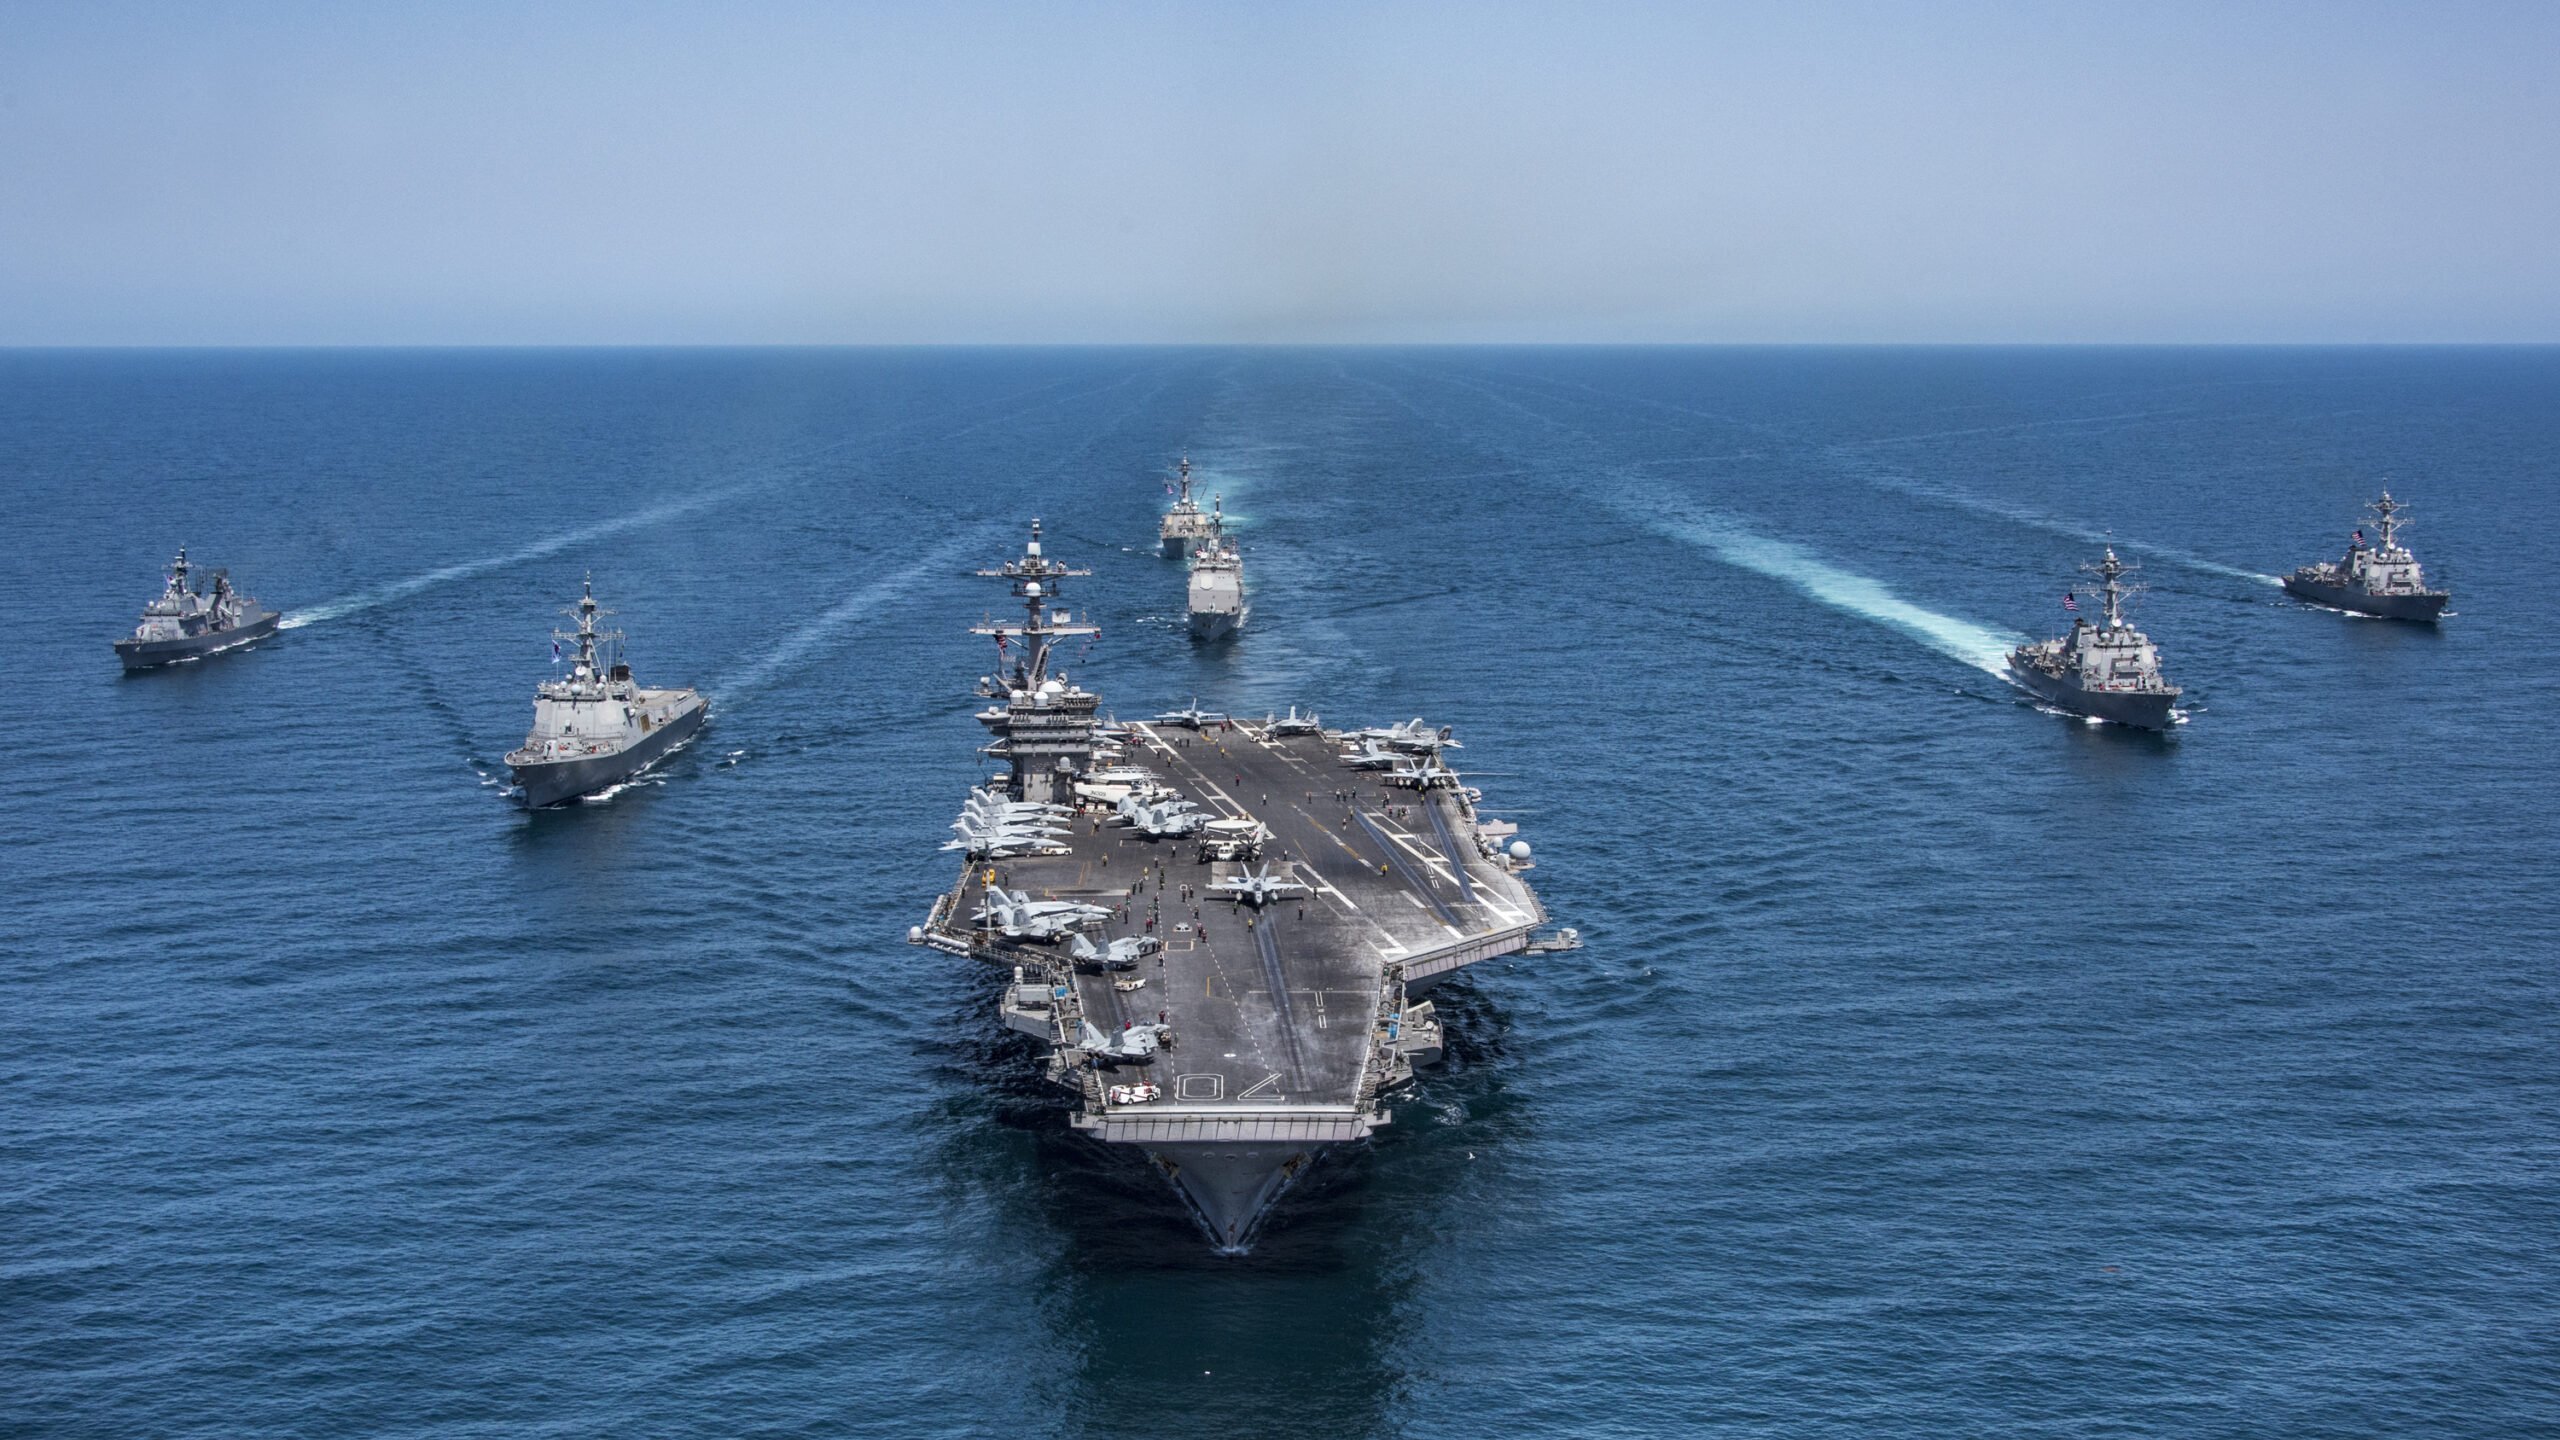 The underrated Navy topics you might have missed: 5 Stories From